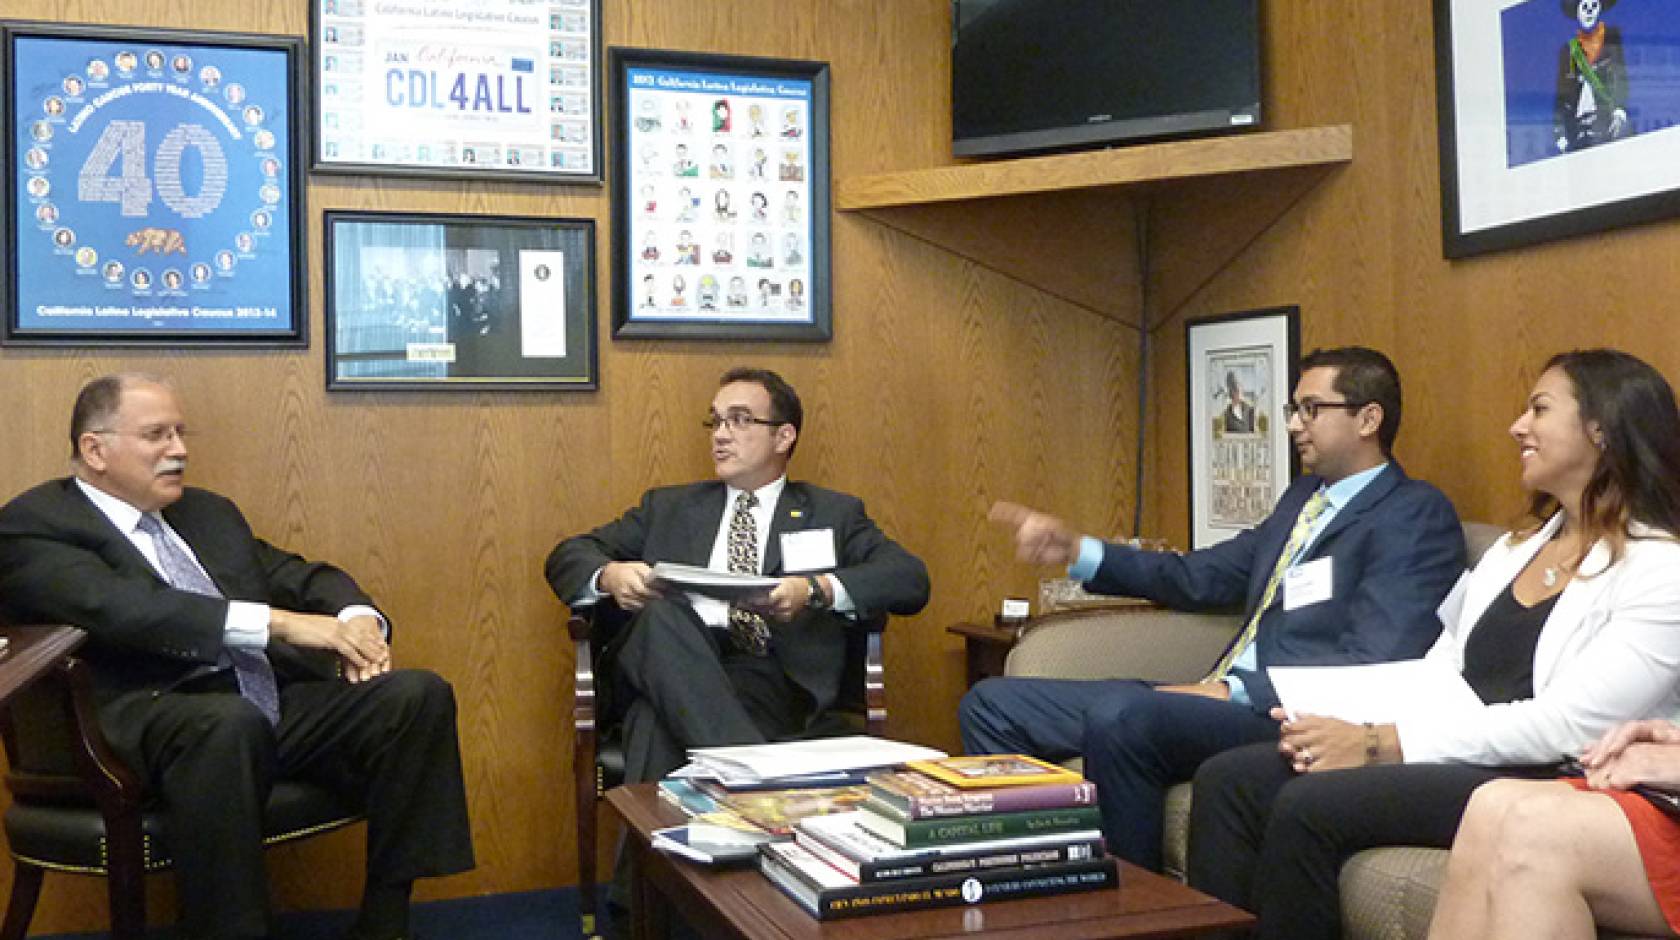 UC Riverside grad students Vicente Nunez and Jessica Diaz, along with graduate dean Joseph Childers, chatted with state Assemblyman Jose Medina about the nature of their research.